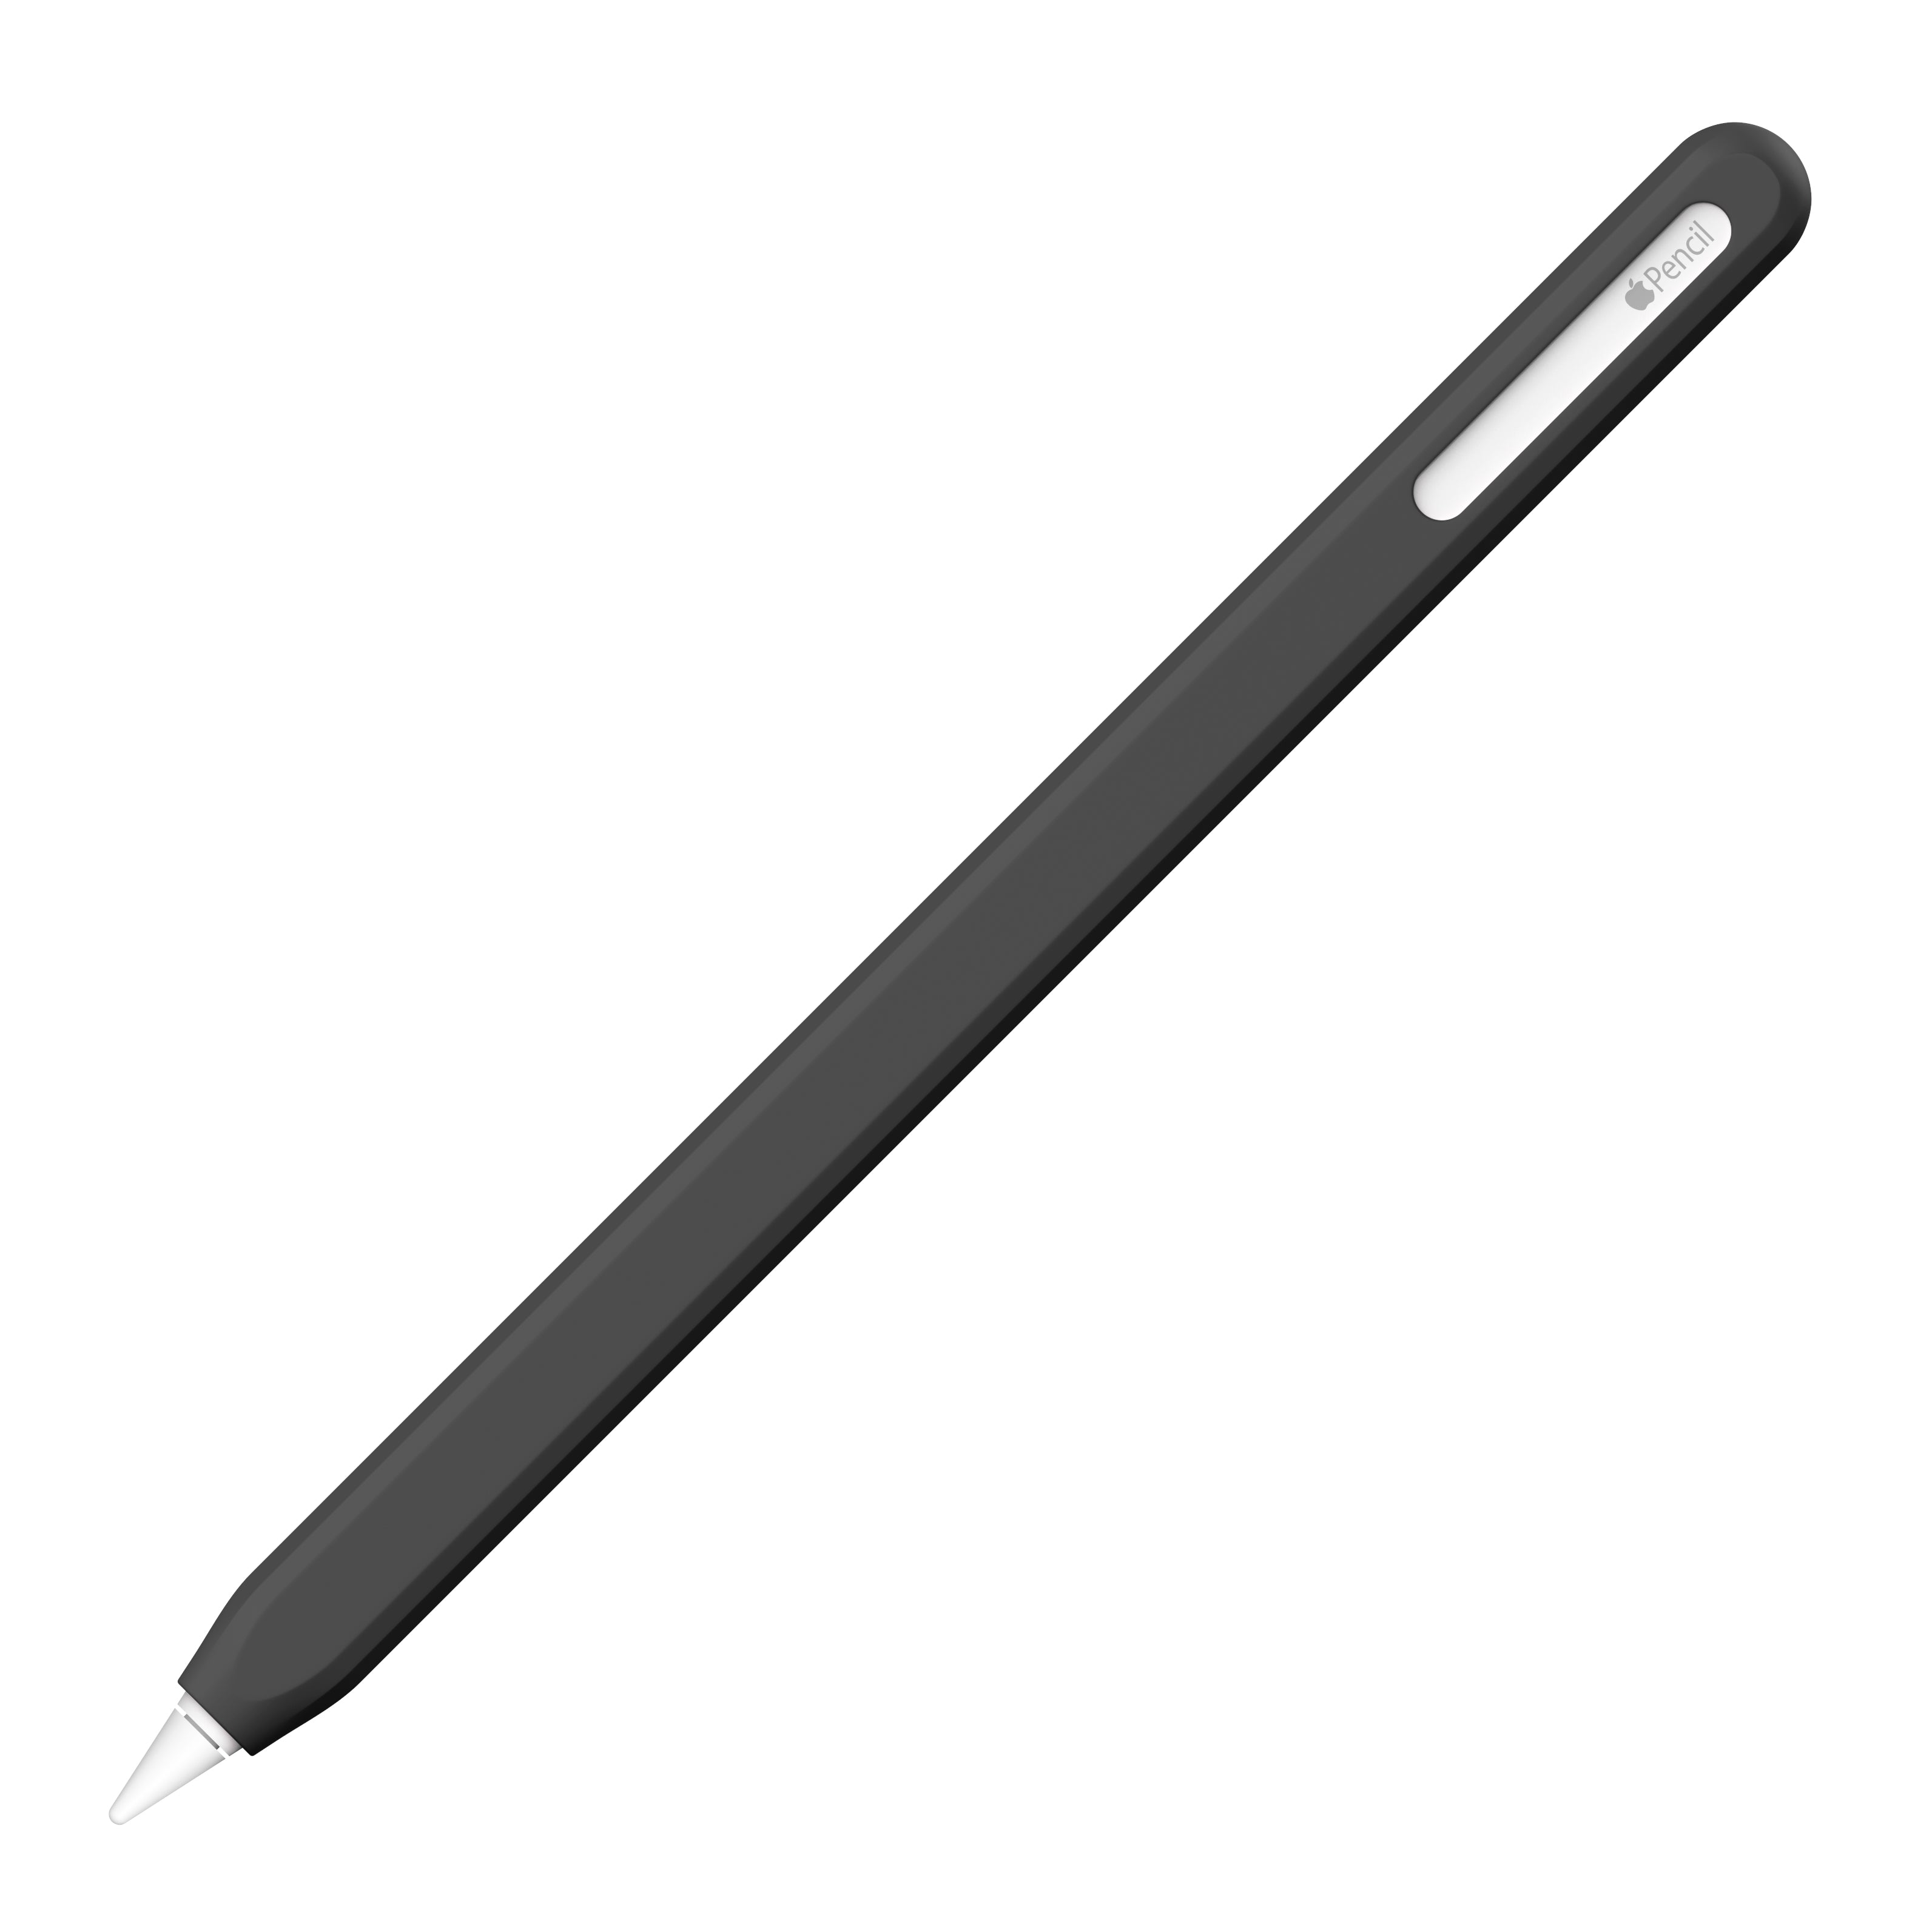 Apple Pencil 2 drops to to $79 at , its second-best price (Reg. $129)